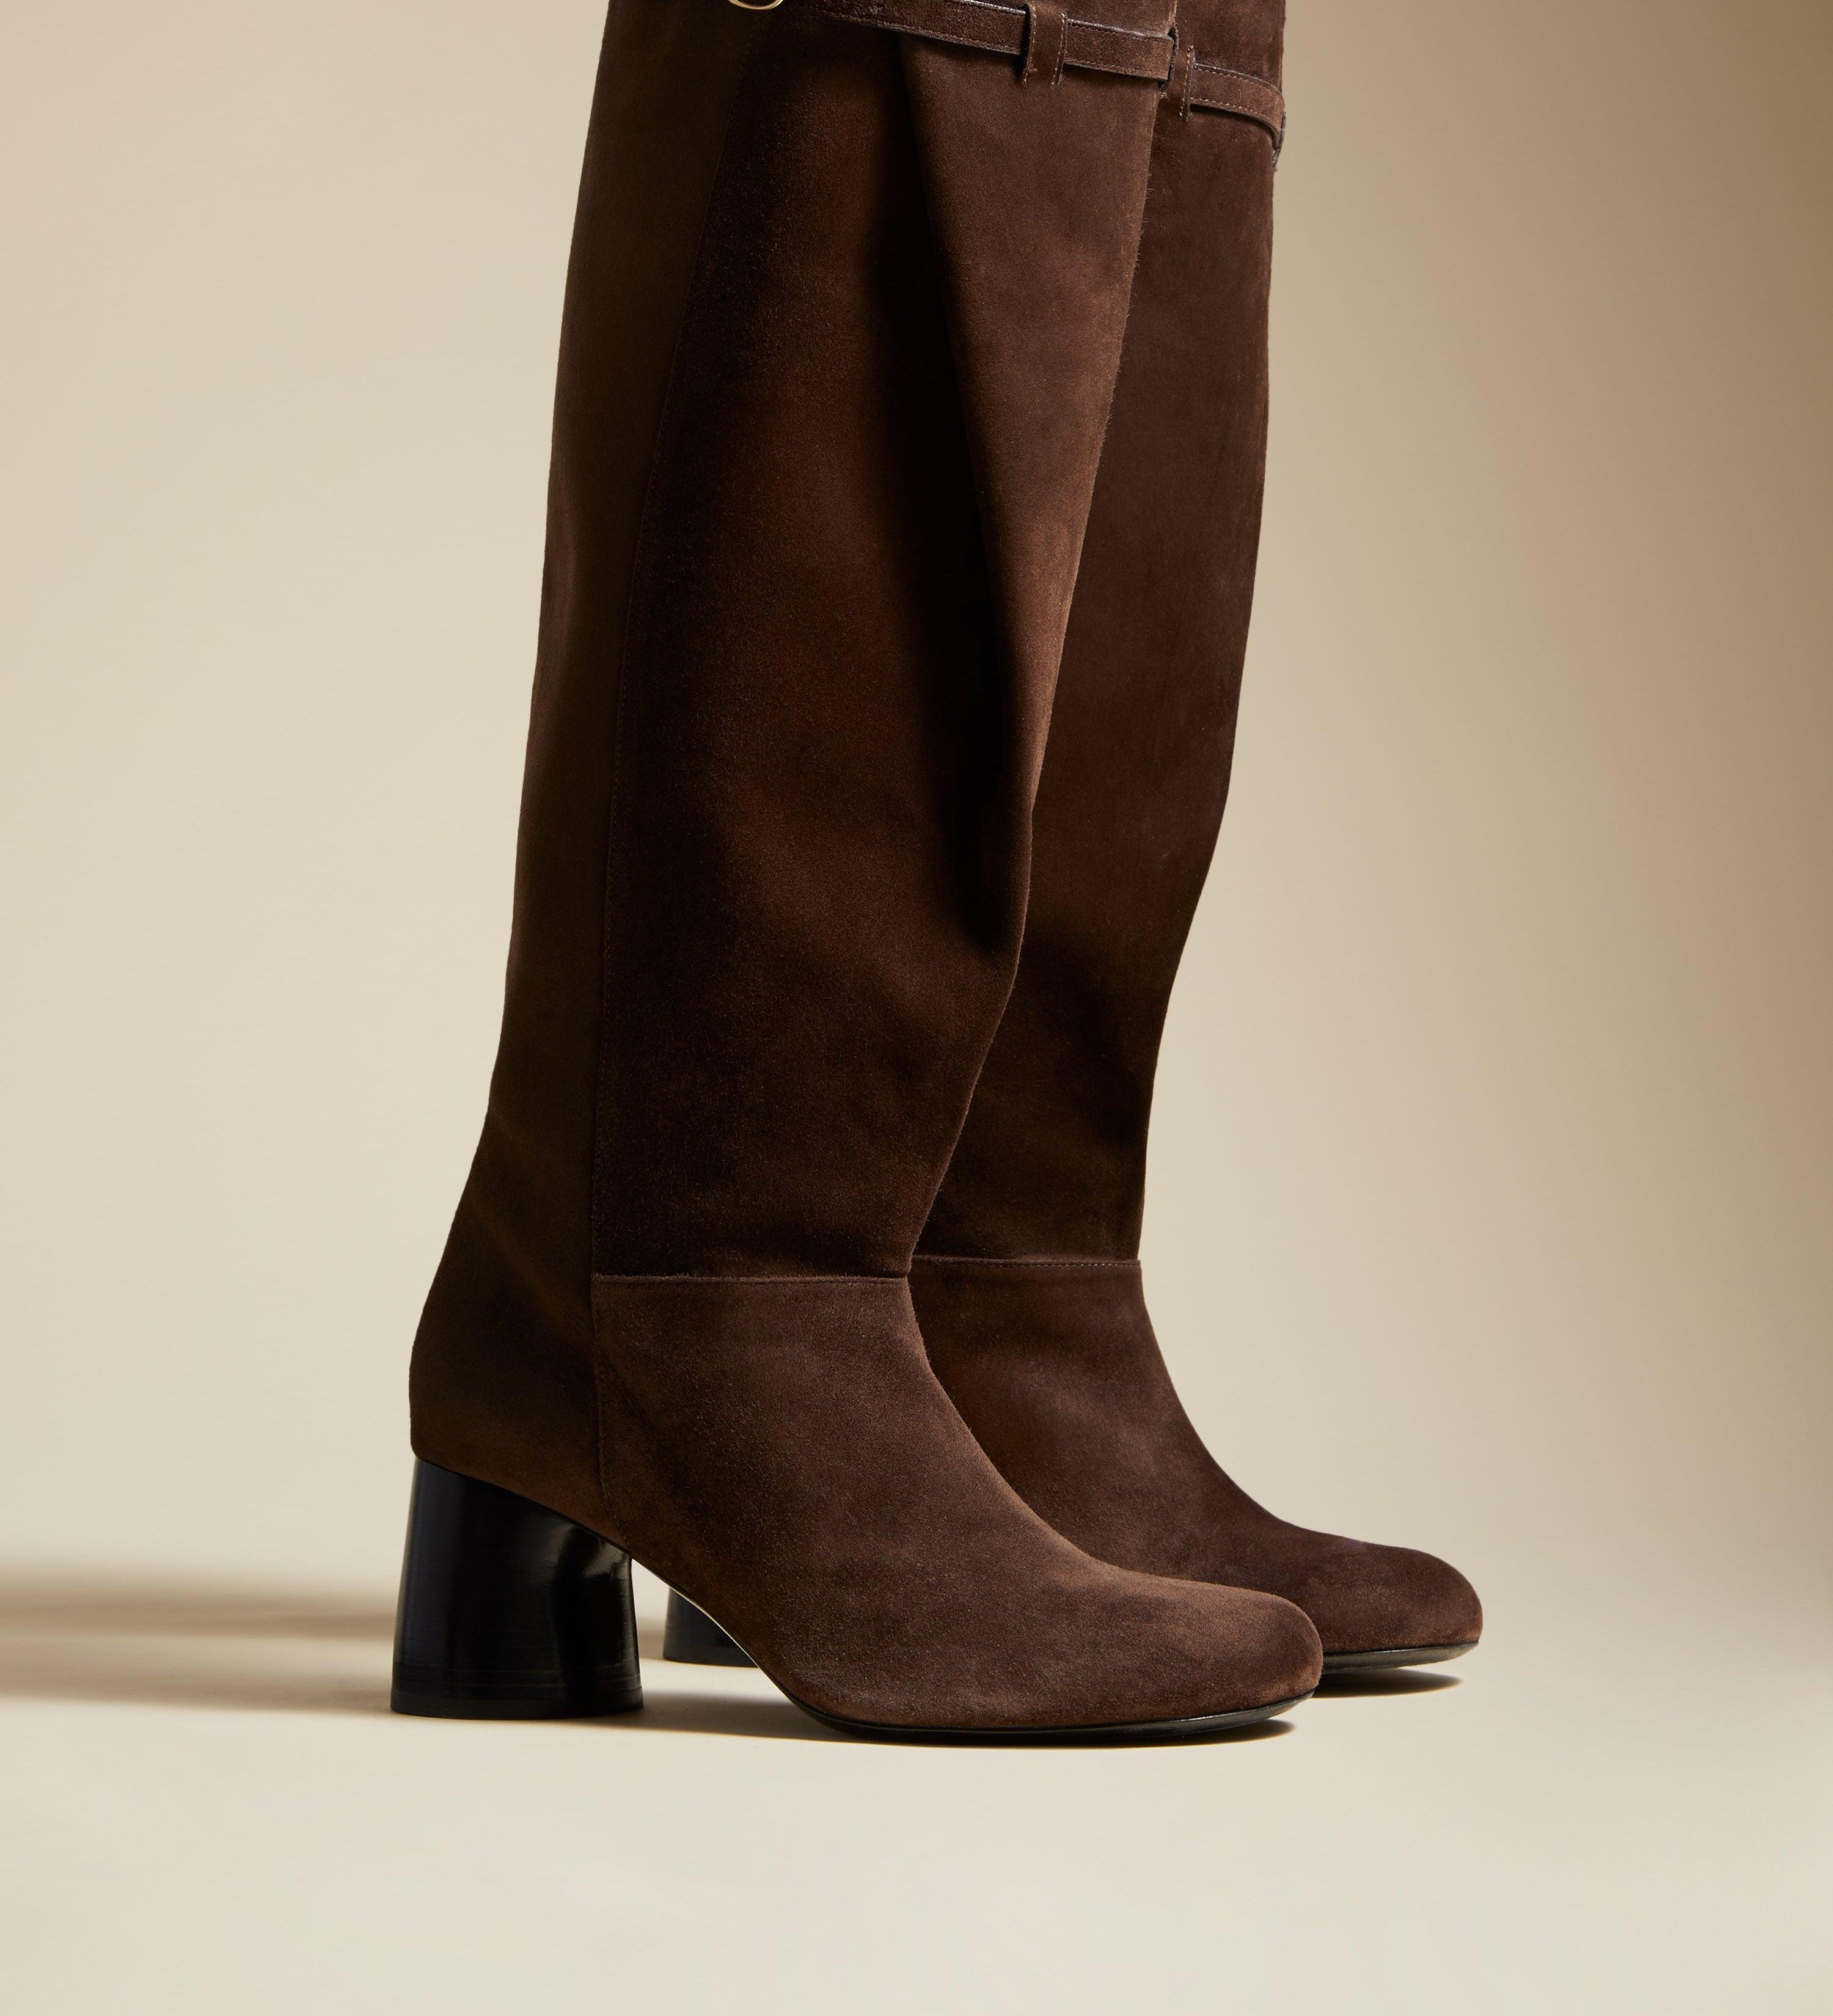 The Admiral Knee-High Boot in Coffee Suede - The Iconic Issue